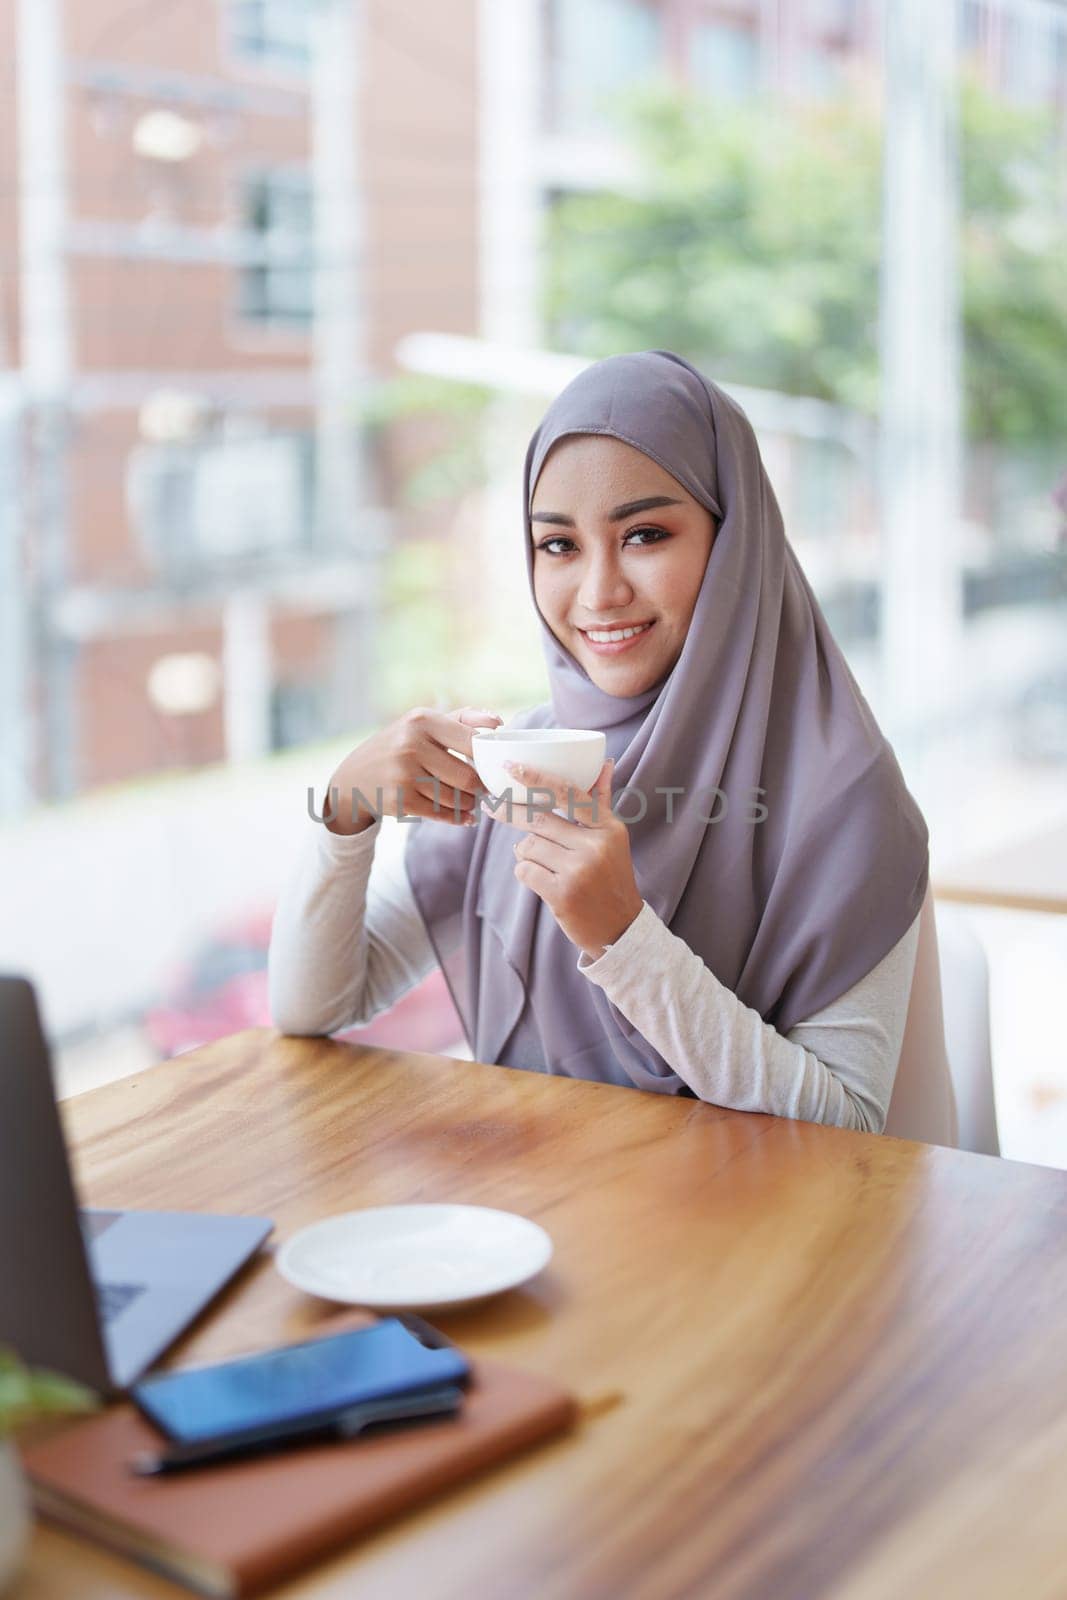 A beautiful Muslim woman with a smiling face in the morning drinking coffee and using a computer by Manastrong